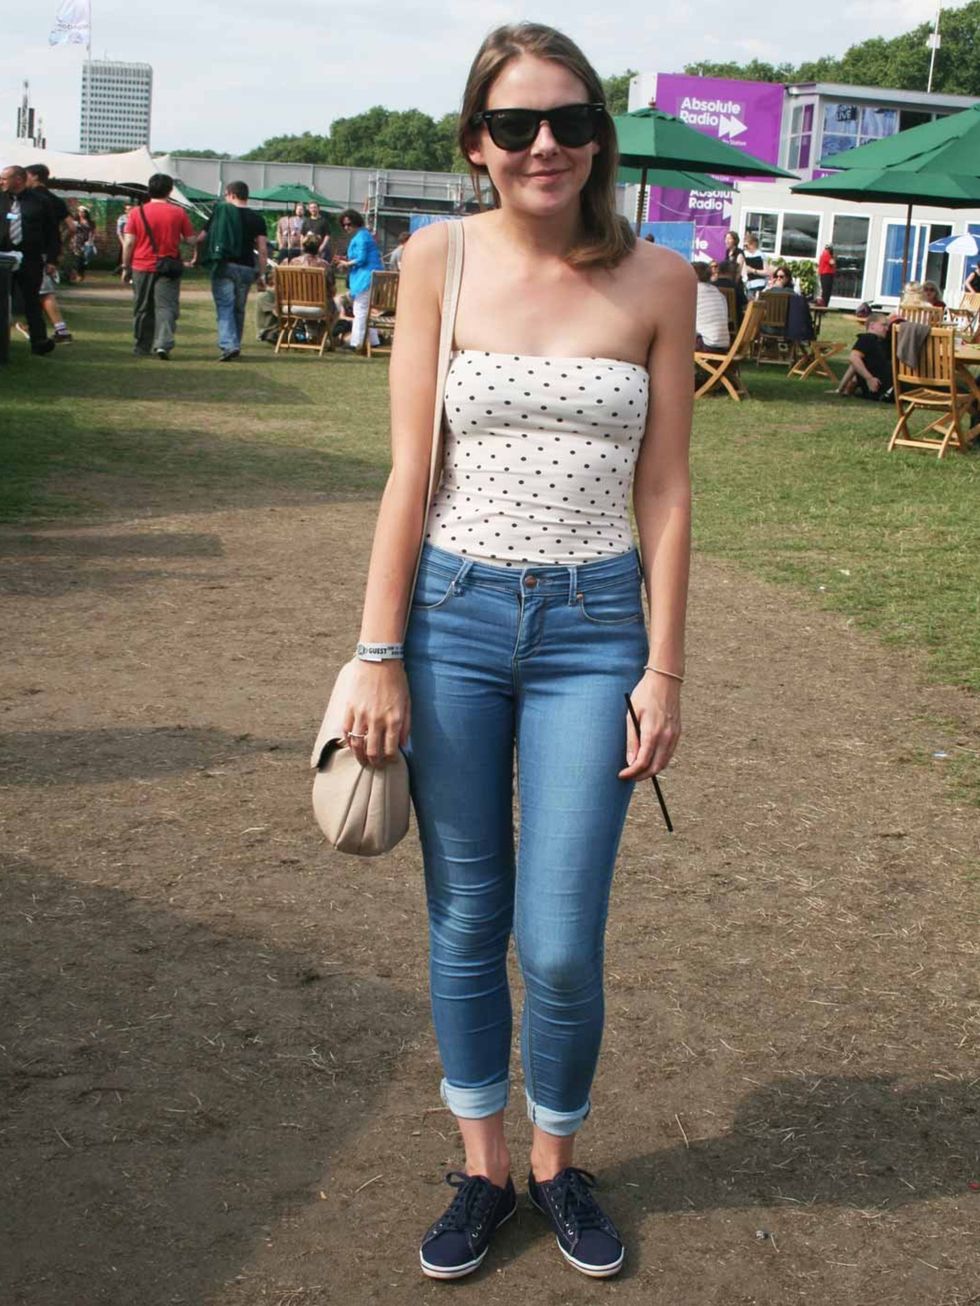 <p>Lynsey Cartwright, 23, Teacher.H&amp;M top, Topshop jeans, Fred Perry shoes, Ray Ban sunglasses, Mischa Barton bag.</p>